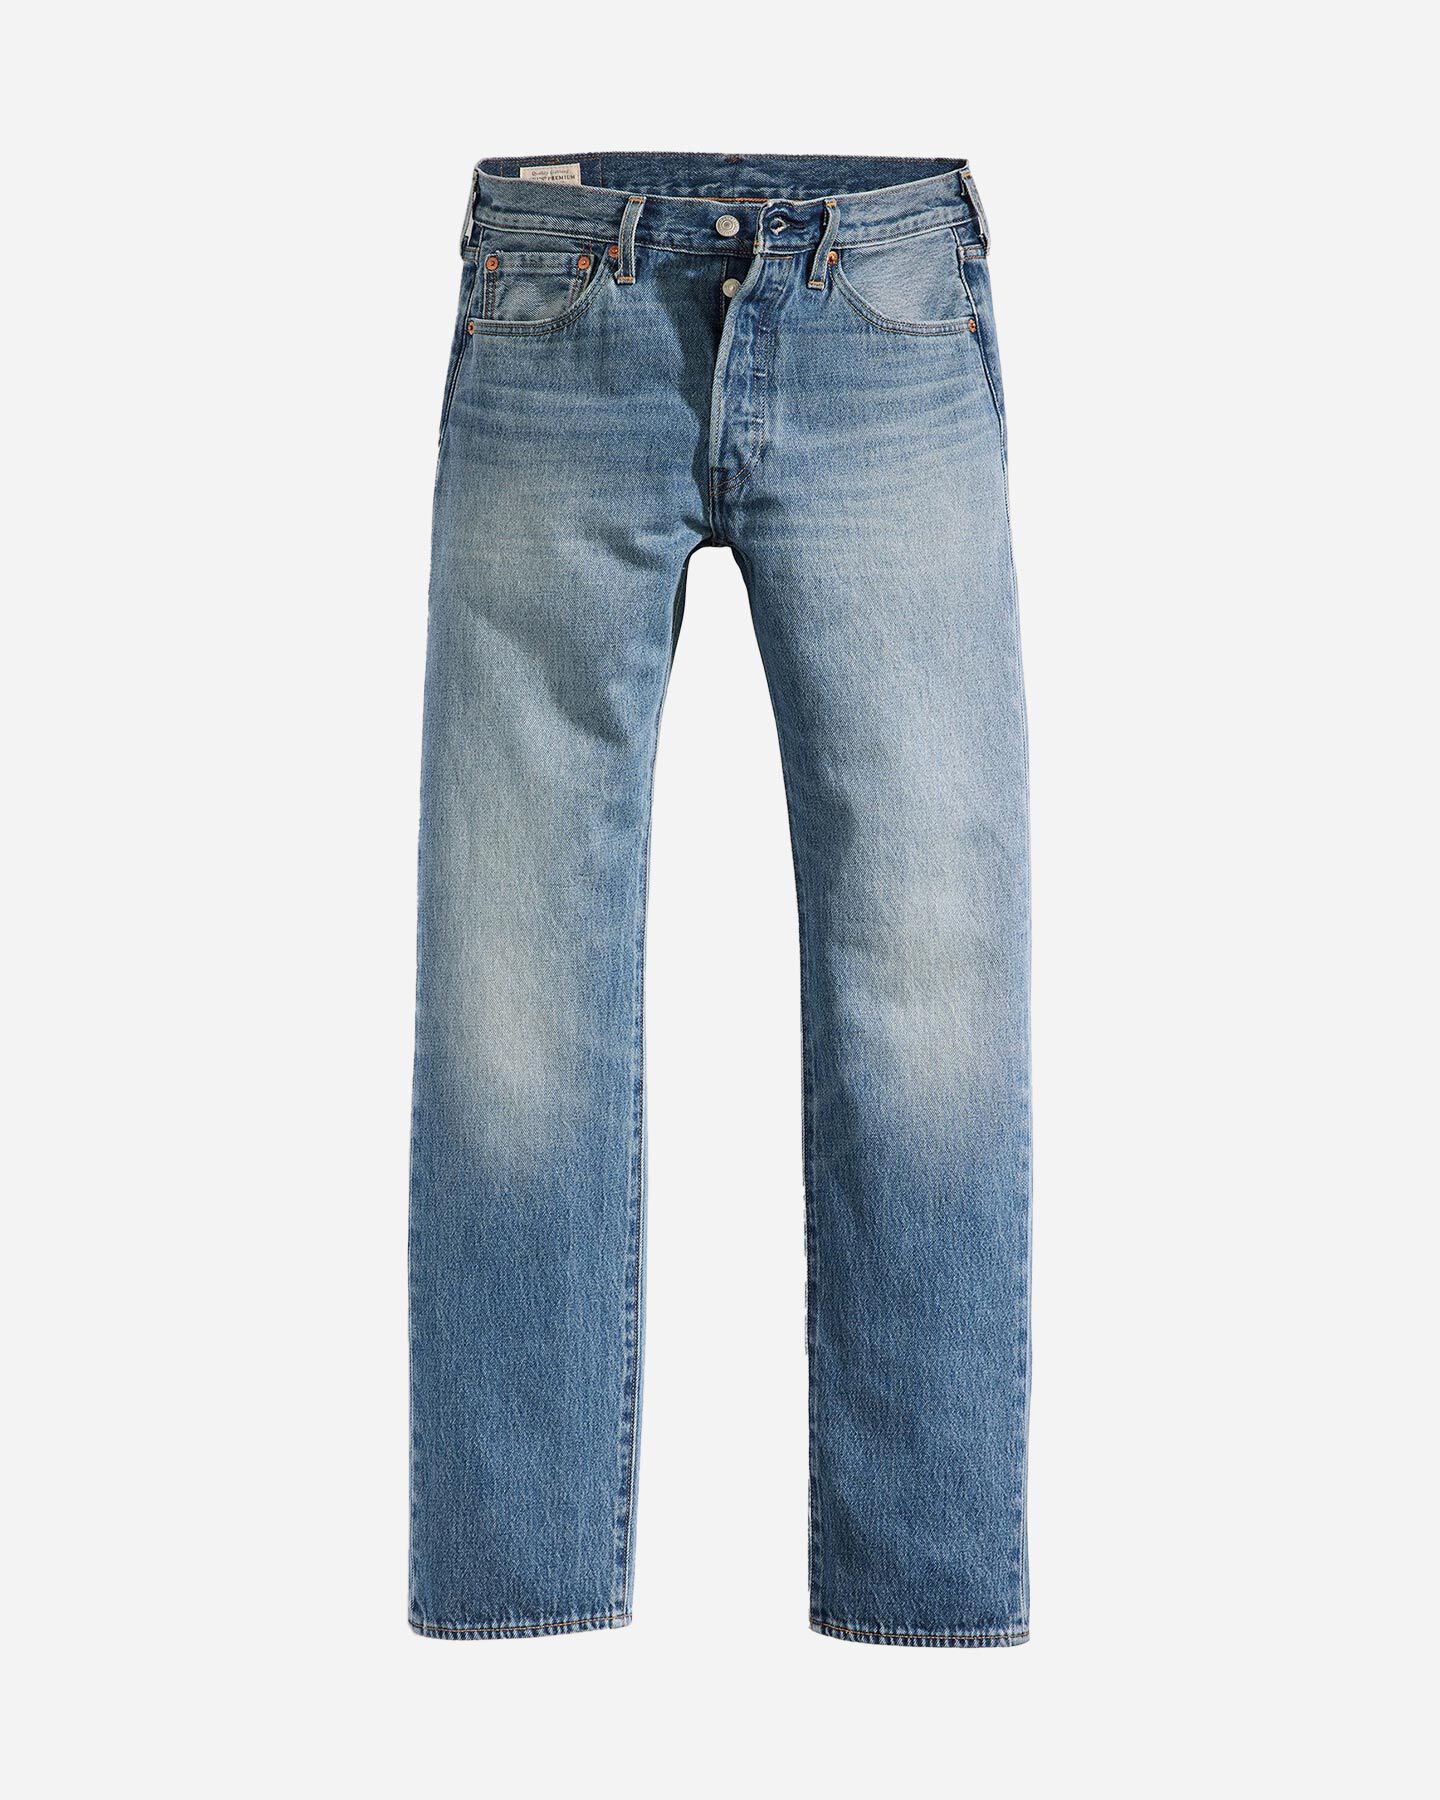  Jeans LEVI'S 501 REGULAR M S4131457|3498|30 scatto 0